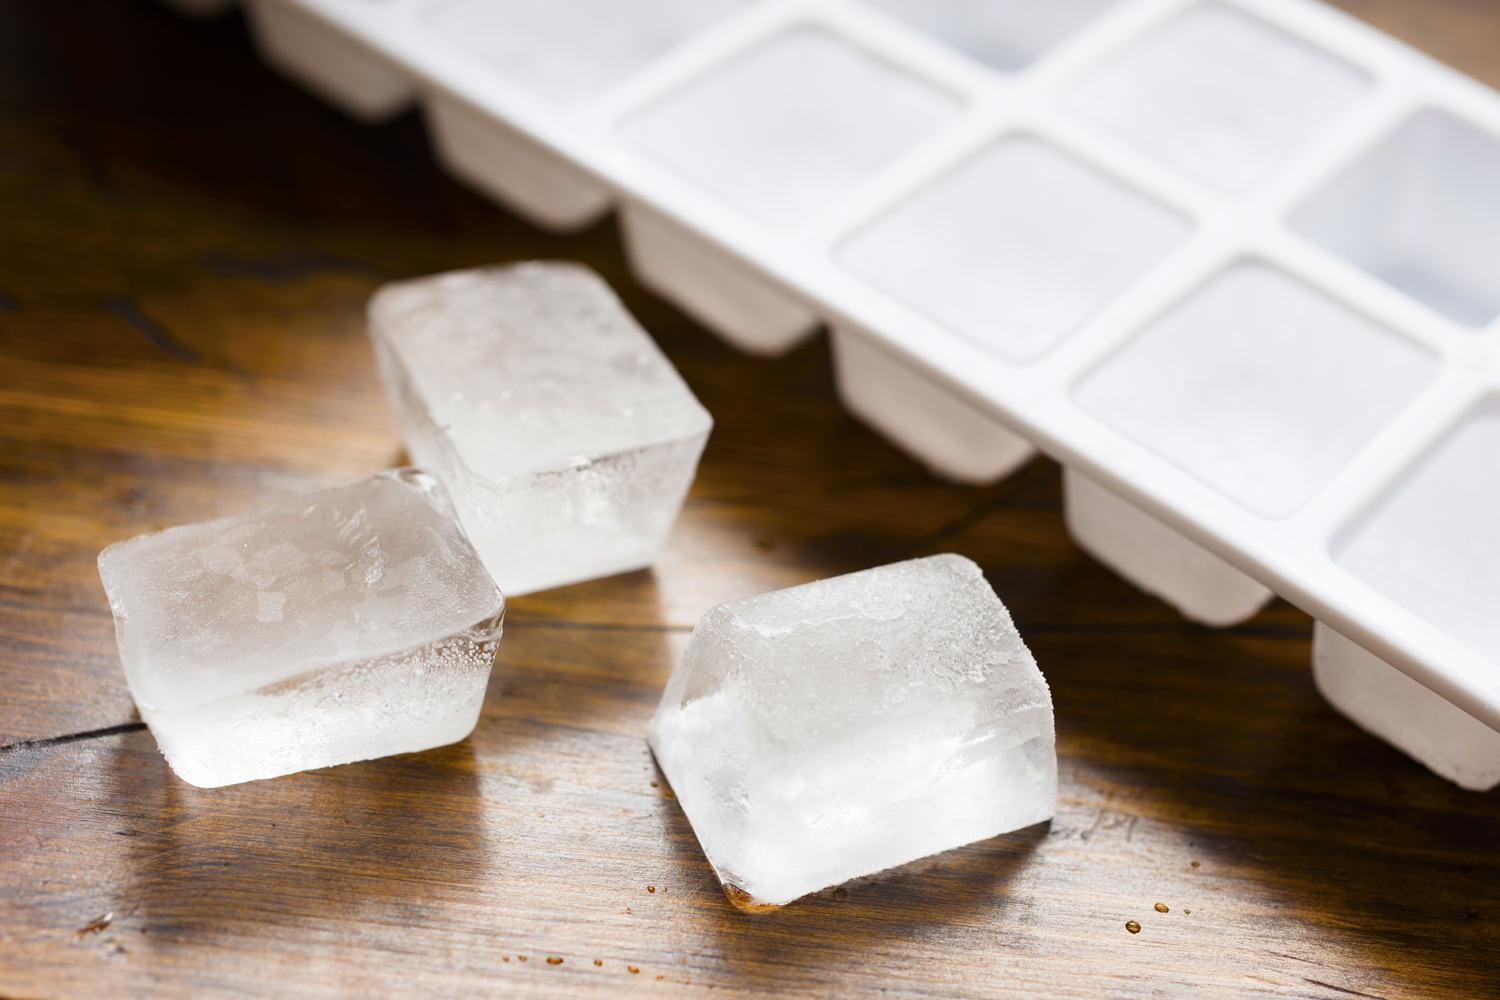 Novelty Ice Cube Trays: Make Your Own Aesthetic Ice Cubes With These Trays  and Molds